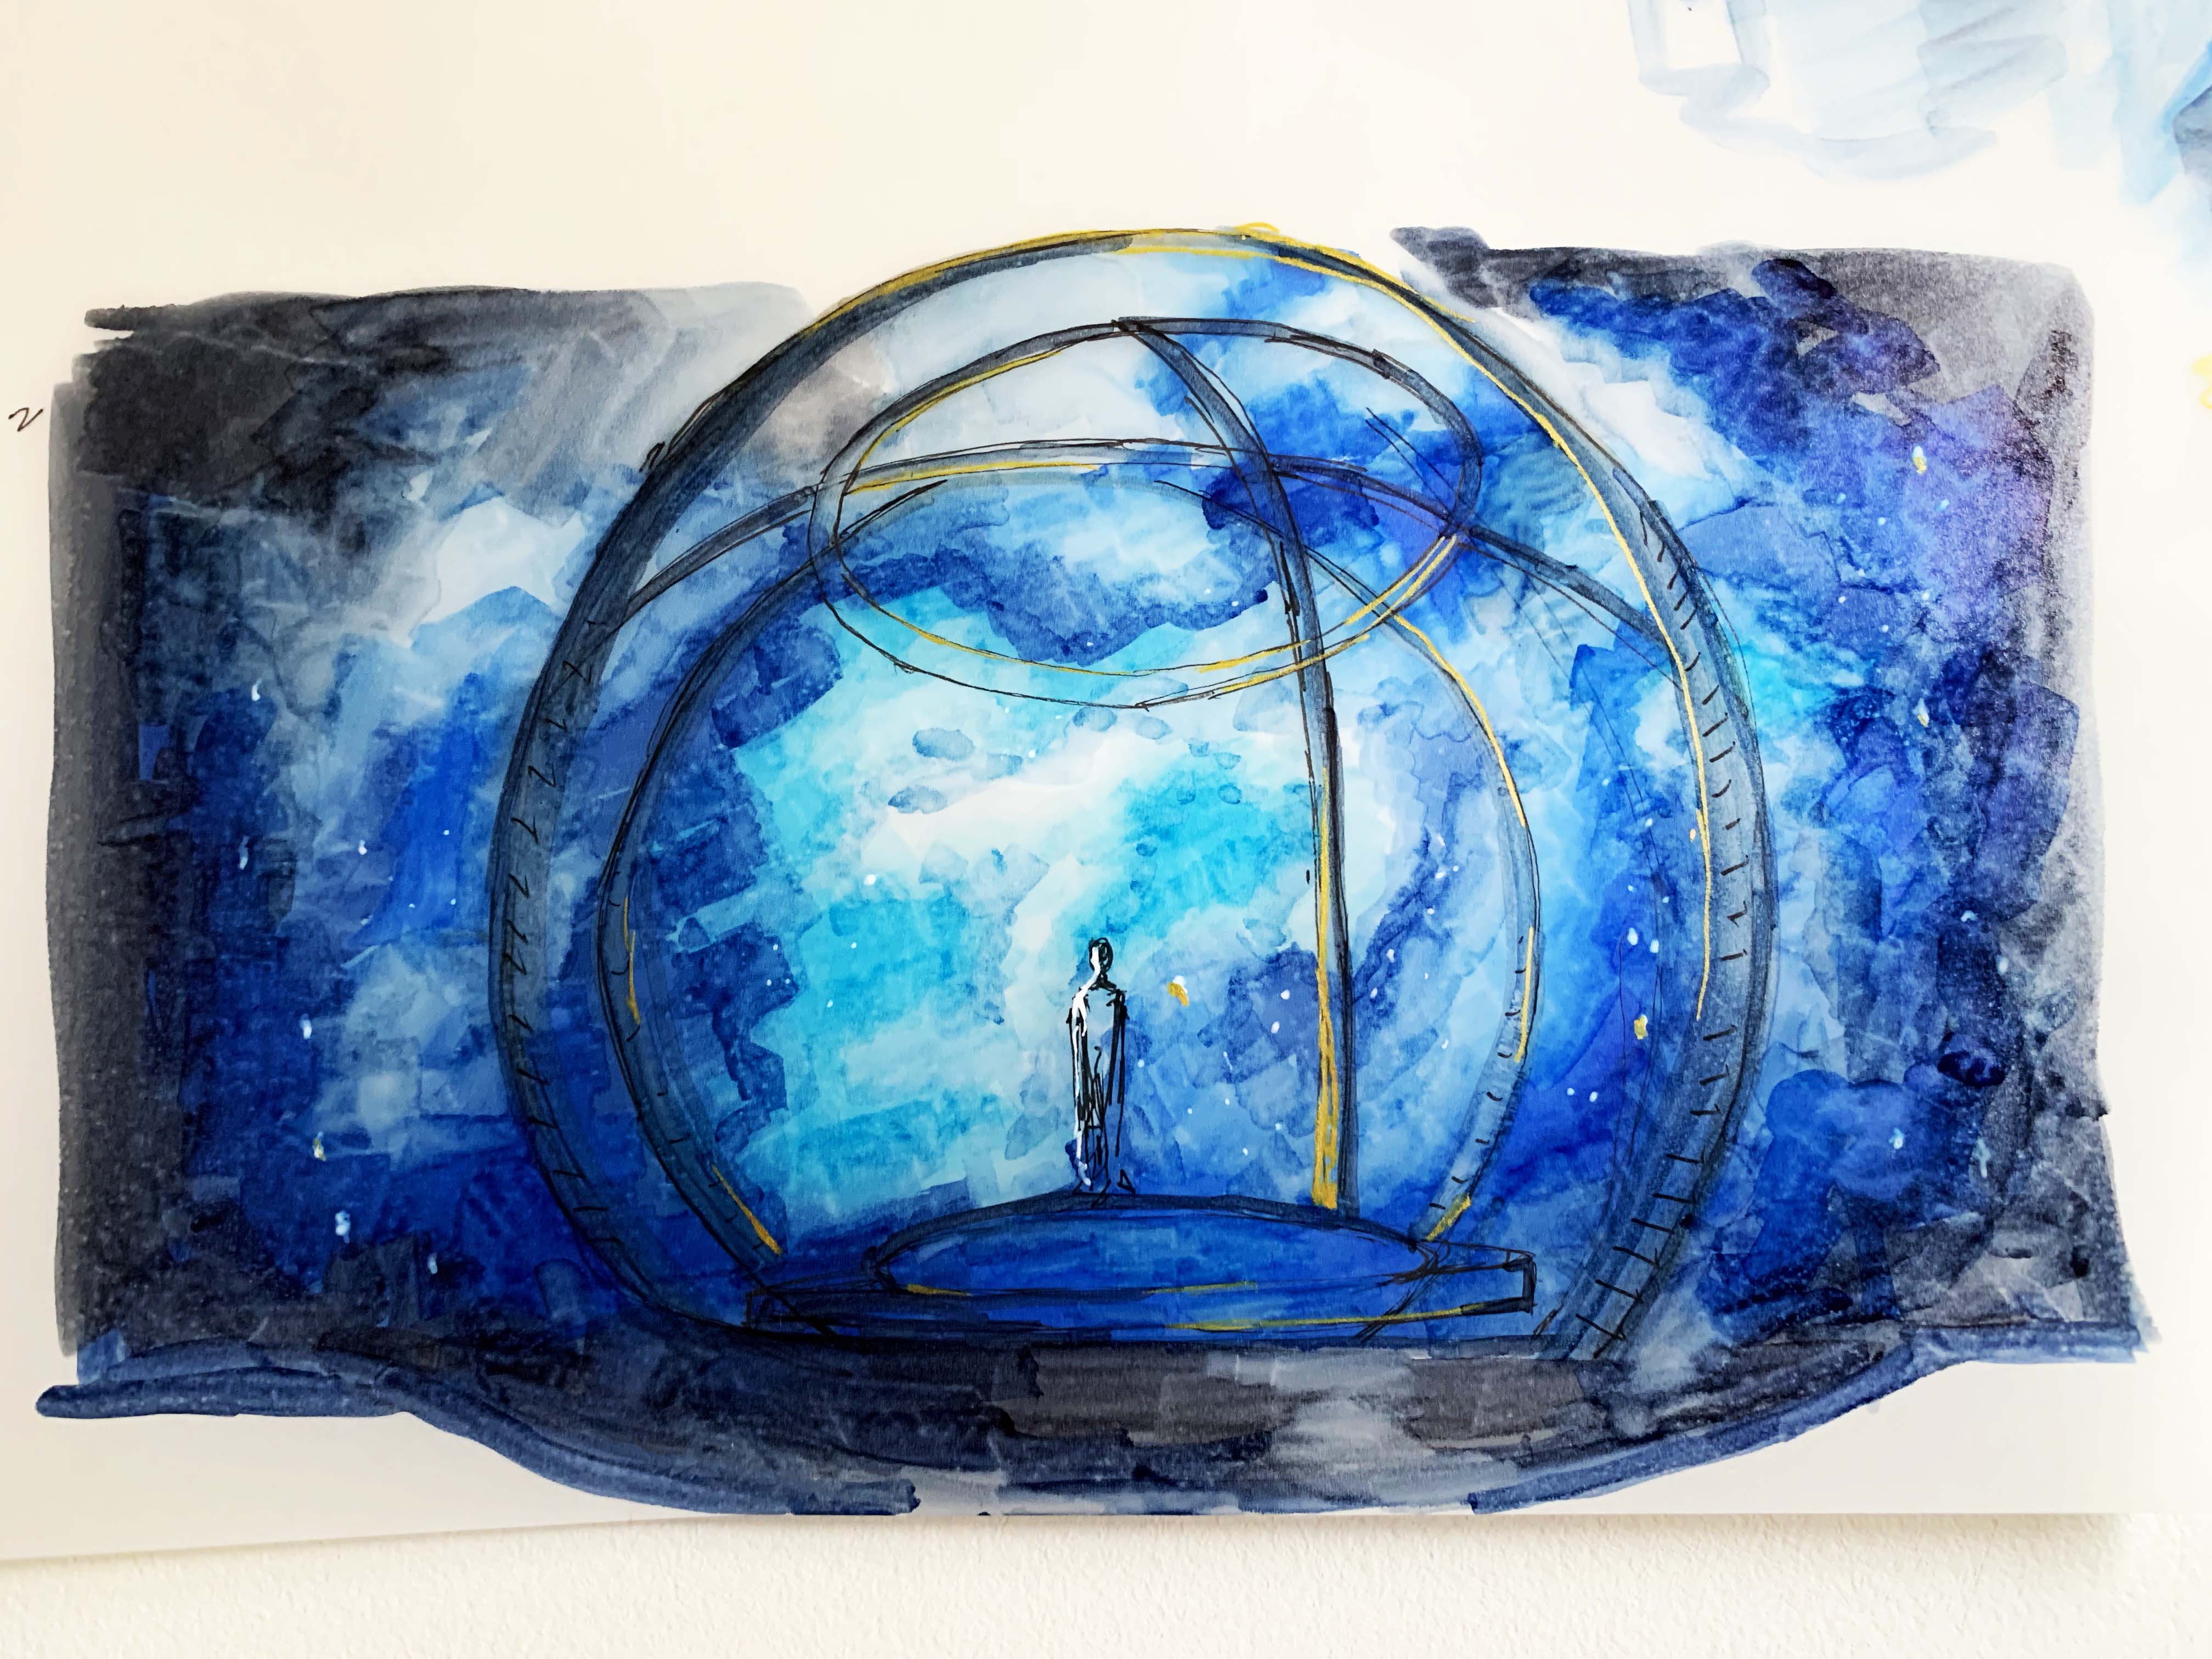 Scenic design concept for "Wrinkle in Time"